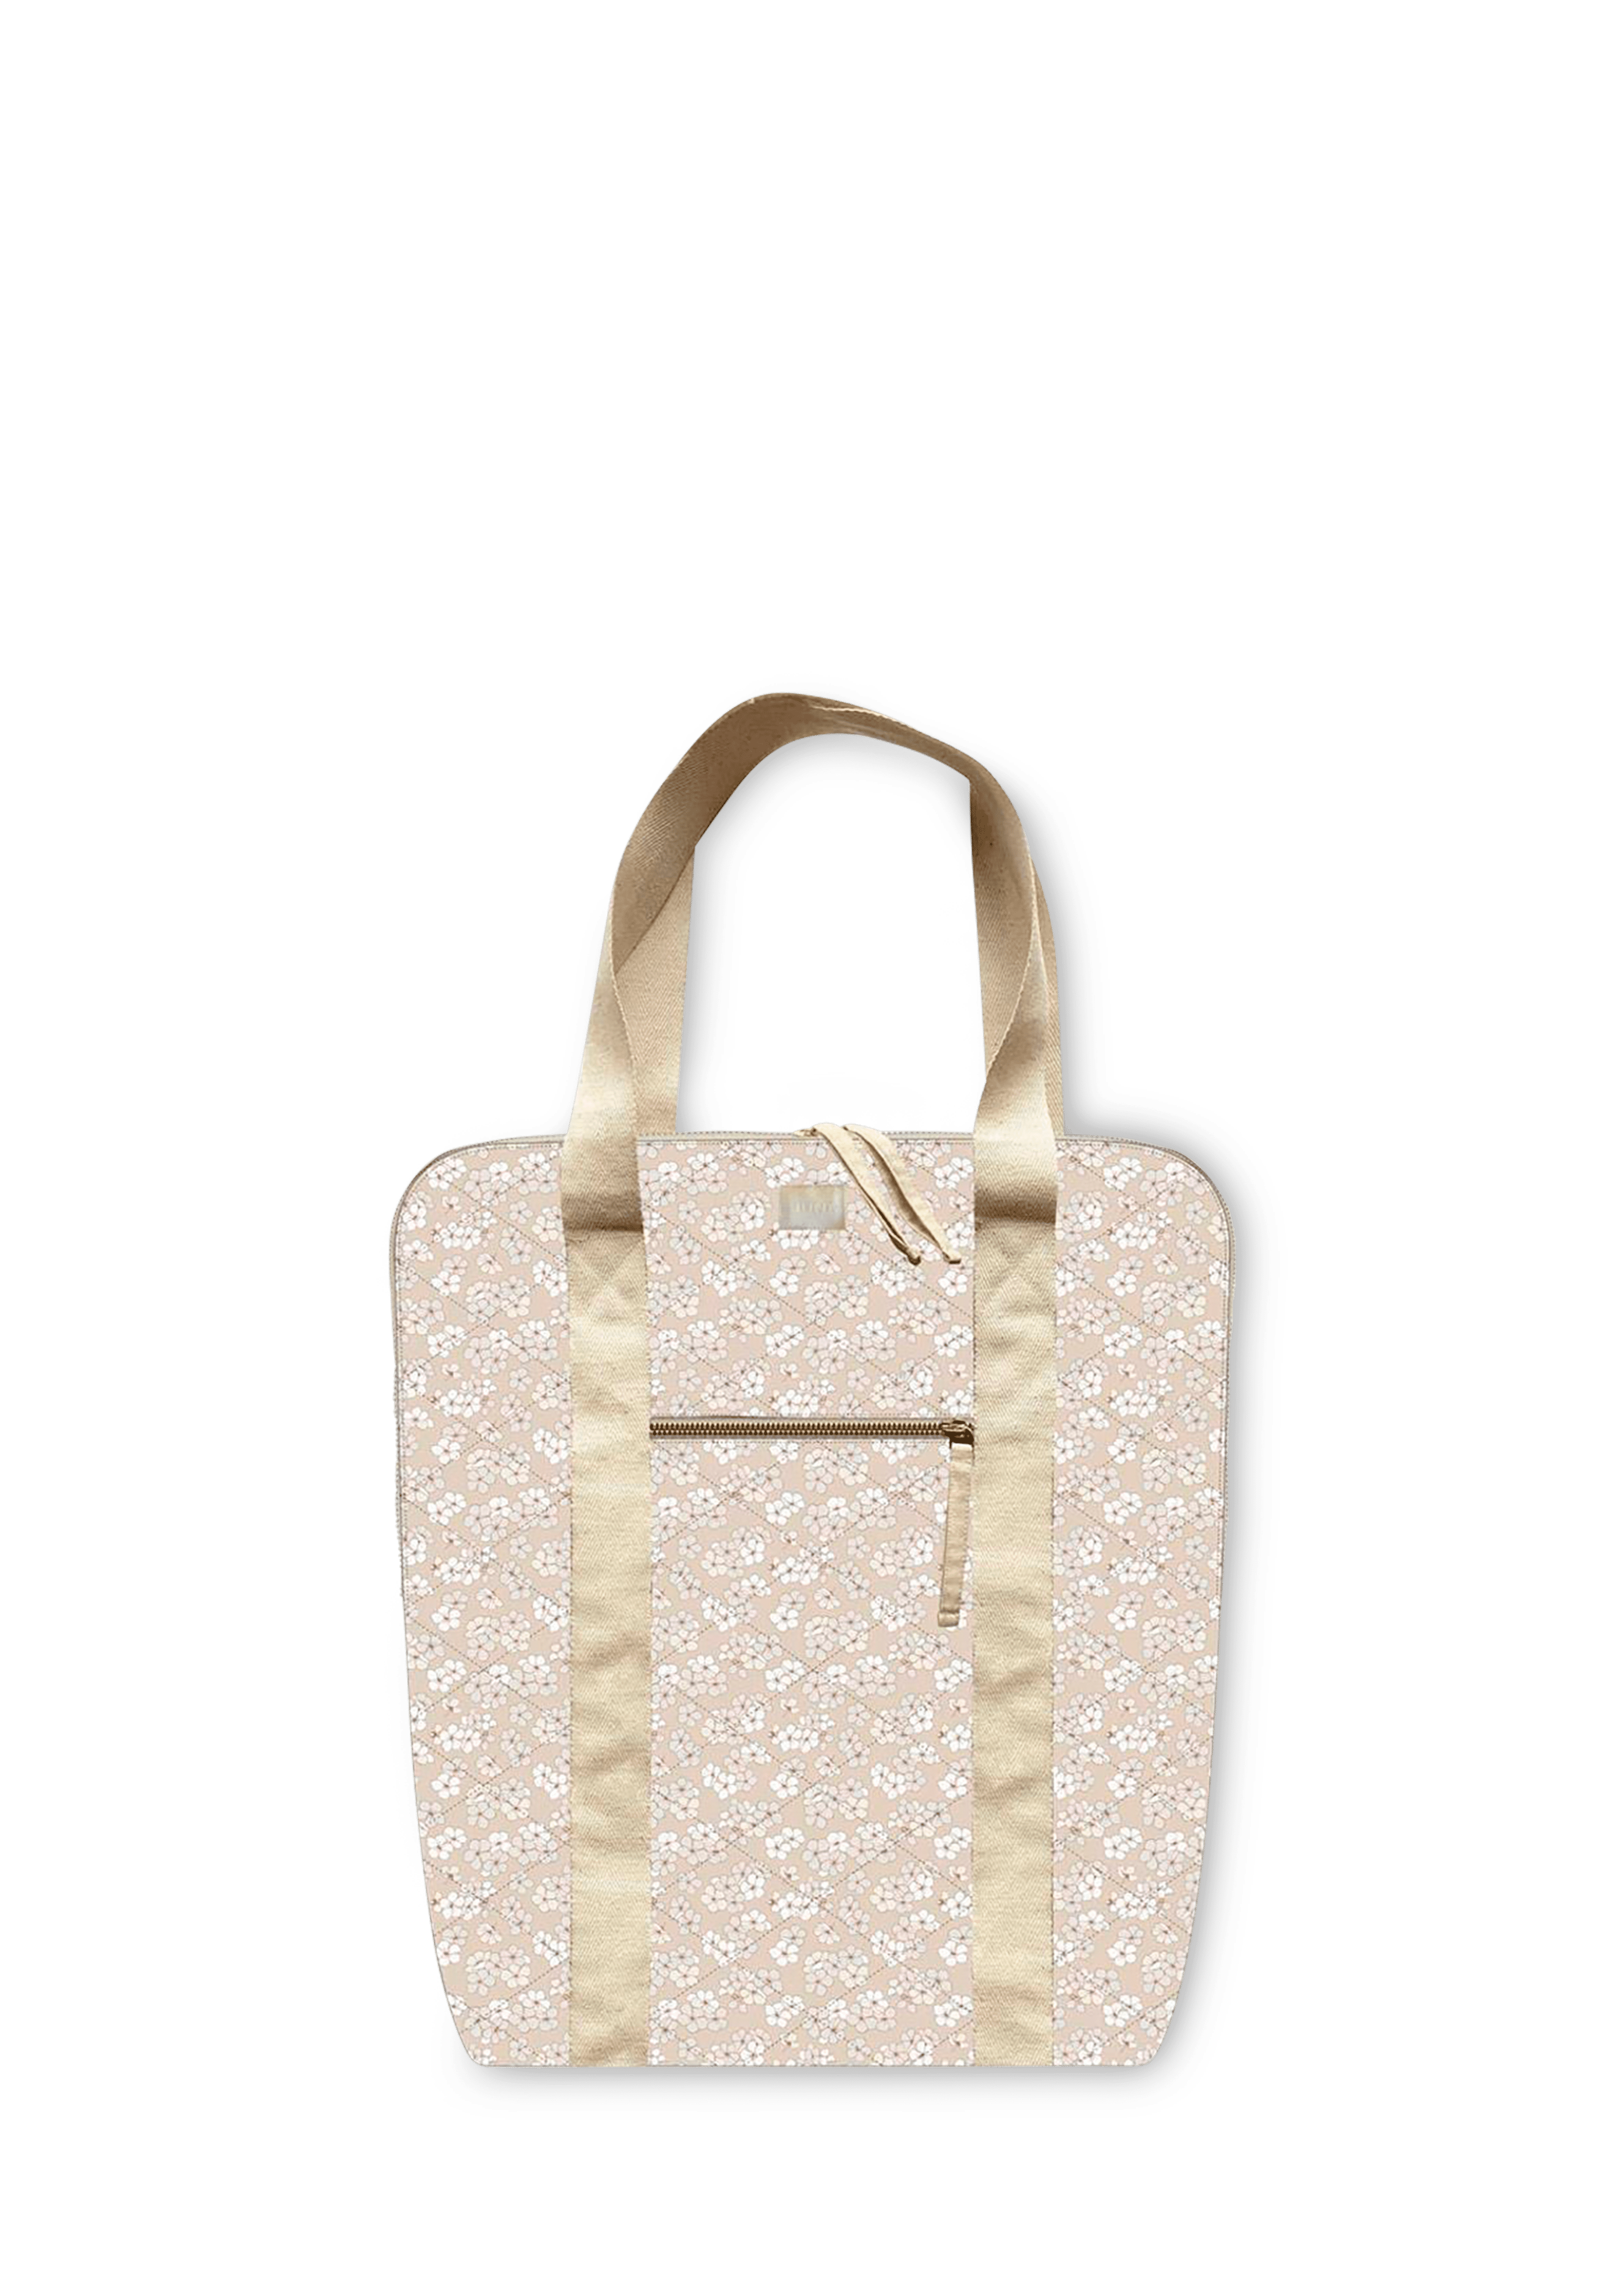 Andrea bag one size